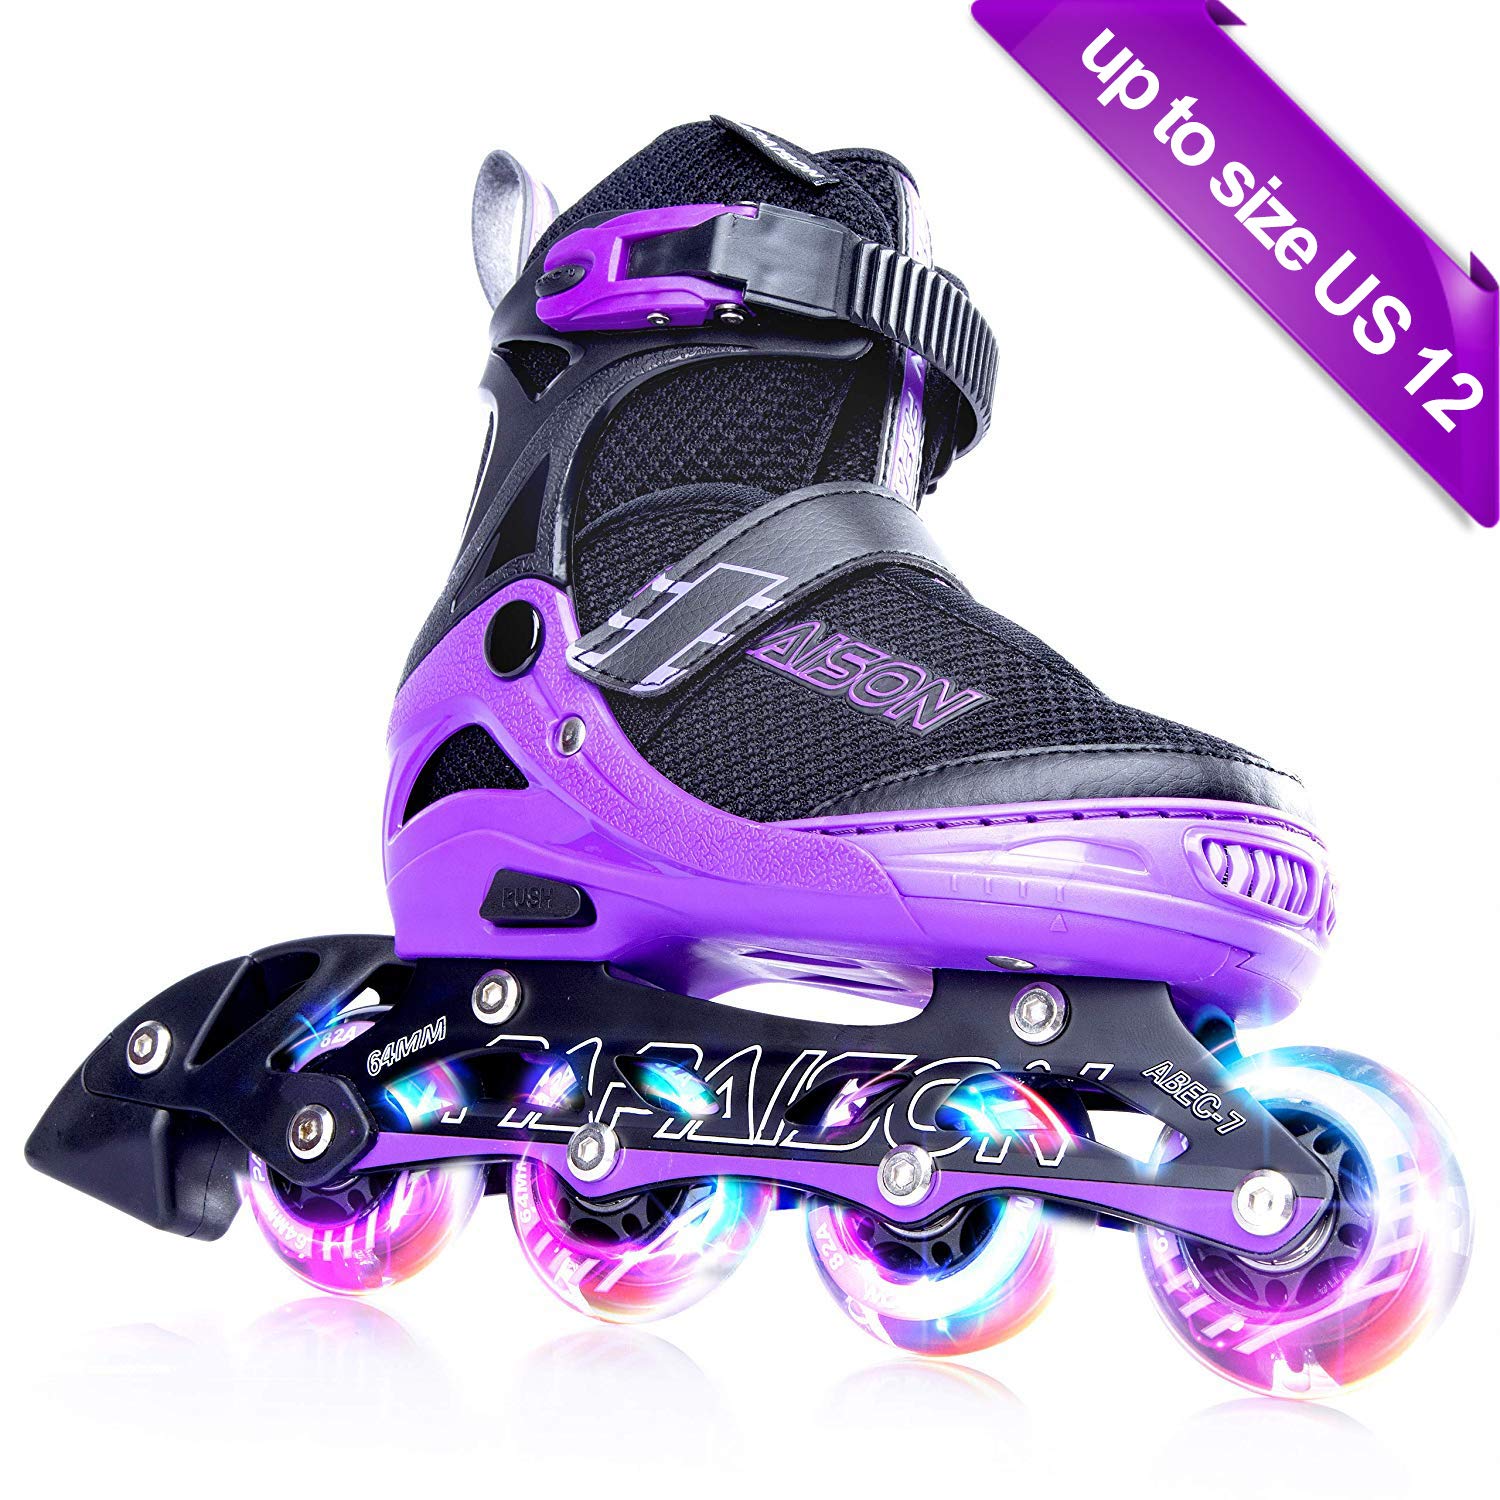 PAPAISON Adjustable Inline Skates for Kids and Adults with Full Light Up LED Wheels